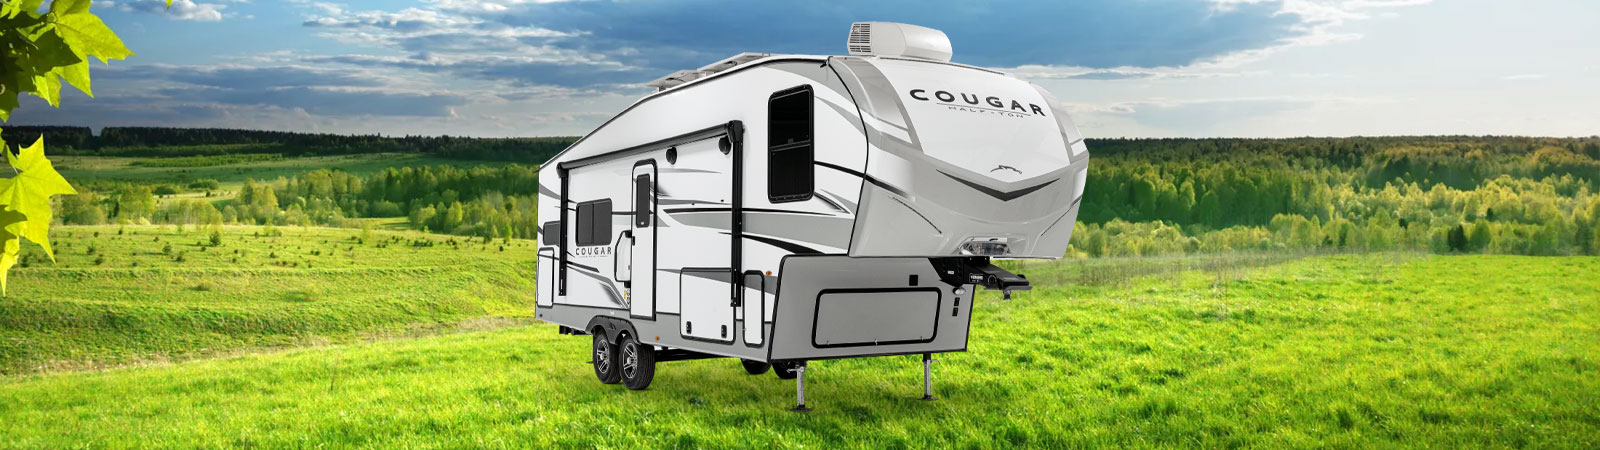 New Keystone RV Cougar Travel Trailer and Fifth Wheel for Sale in Ontario Canada